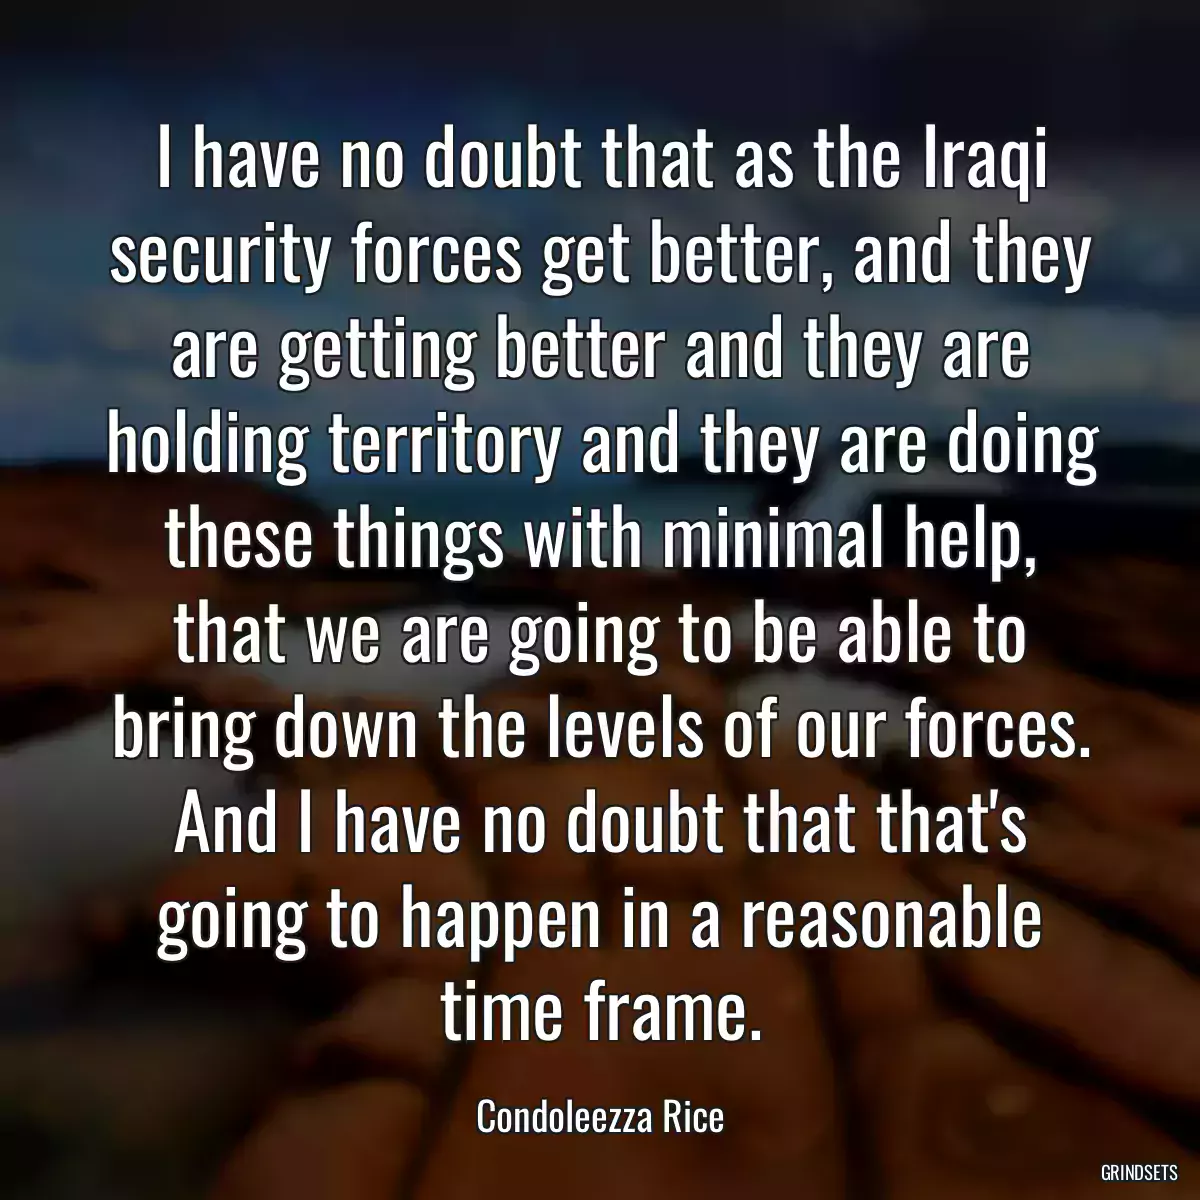 I have no doubt that as the Iraqi security forces get better, and they are getting better and they are holding territory and they are doing these things with minimal help, that we are going to be able to bring down the levels of our forces. And I have no doubt that that\'s going to happen in a reasonable time frame.